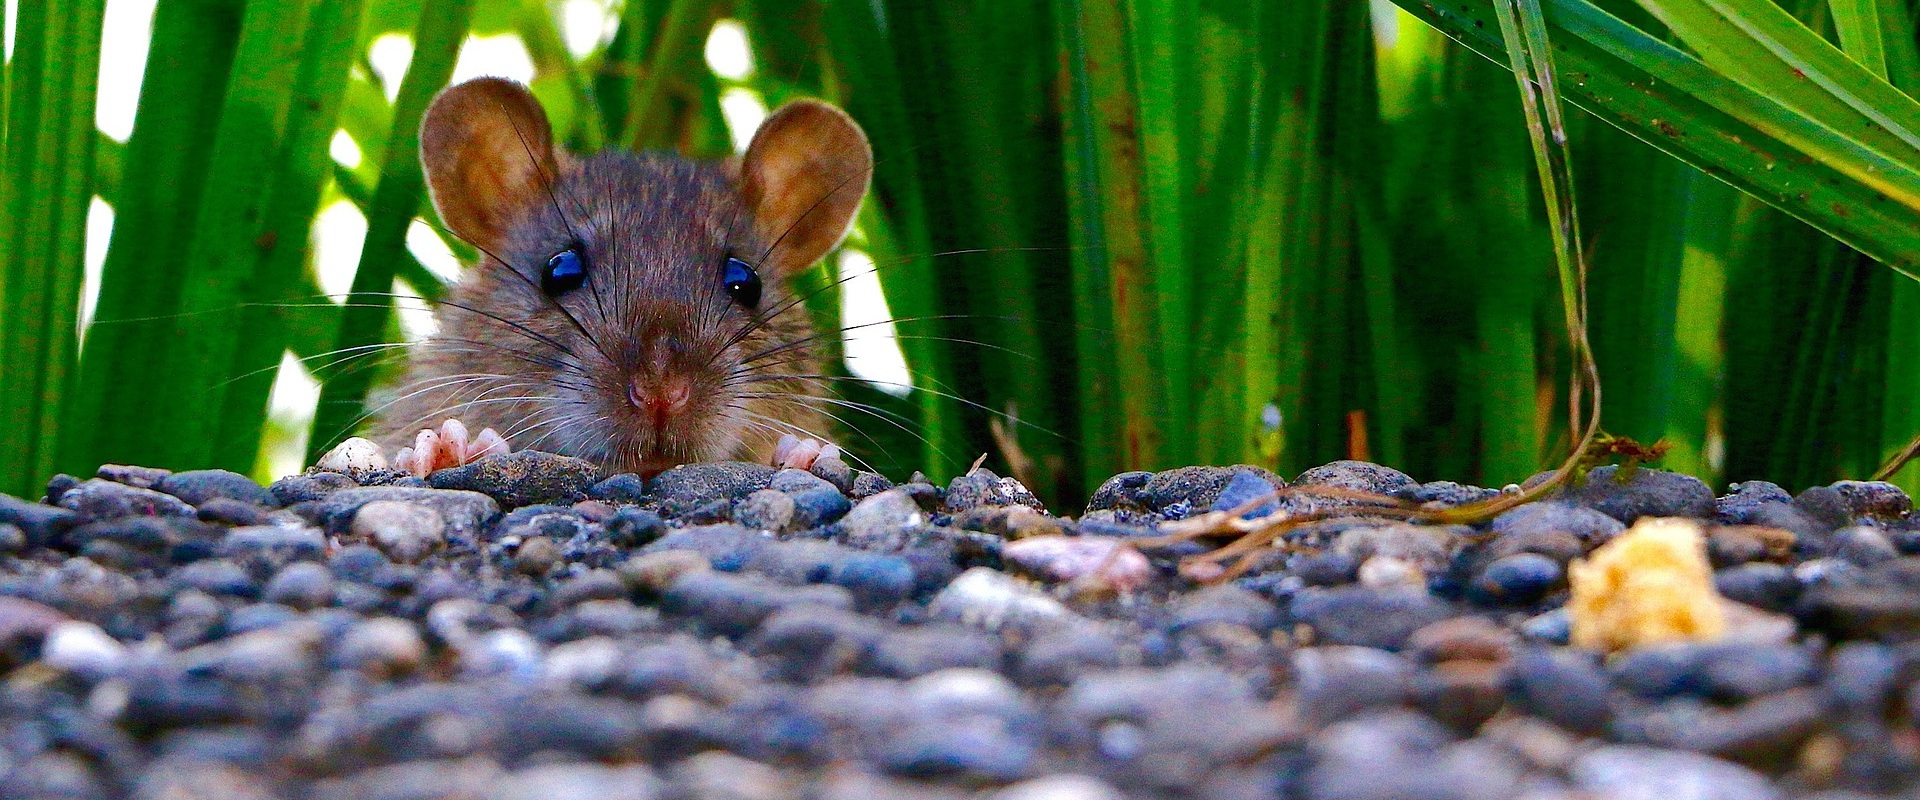 What smells will keep mice away?